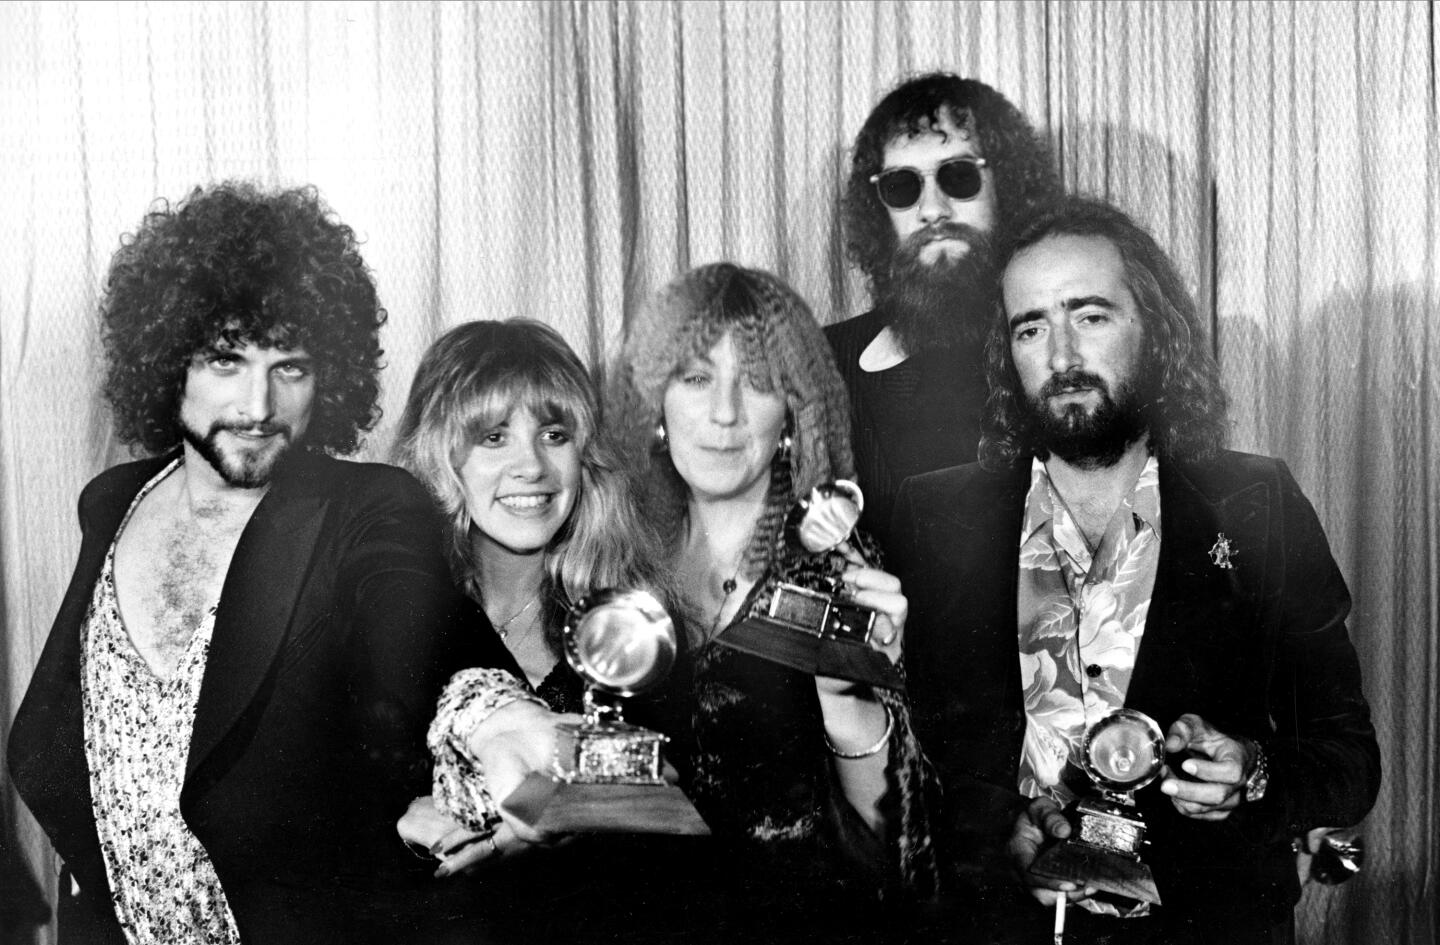 A black-and-white portrait of the band Fleetwood Mac